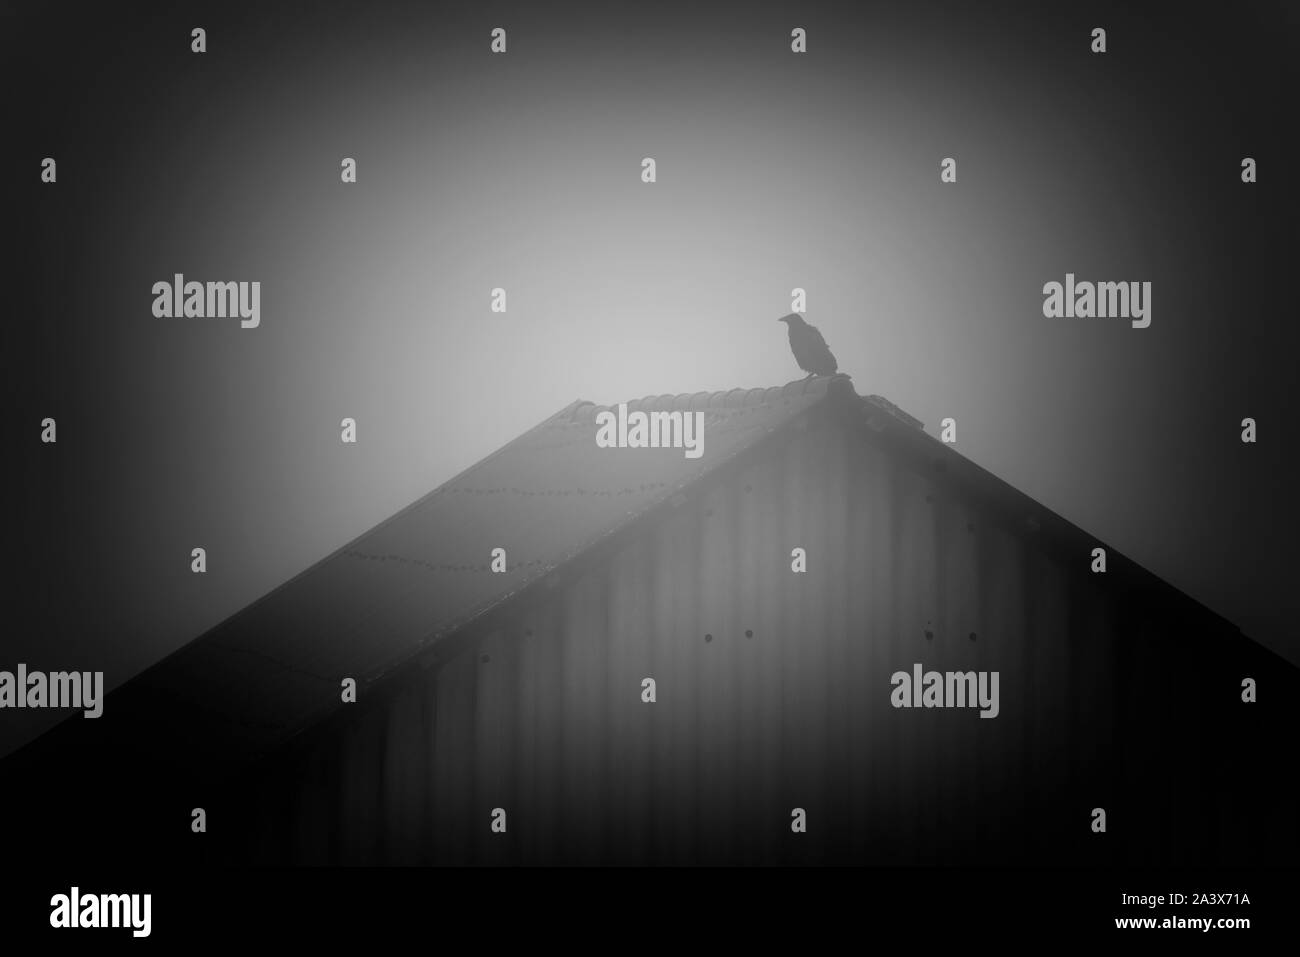 Crow sitting on a roof, Oberweser, Weser Uplands, Weserbergland, Hesse, Germany Stock Photo